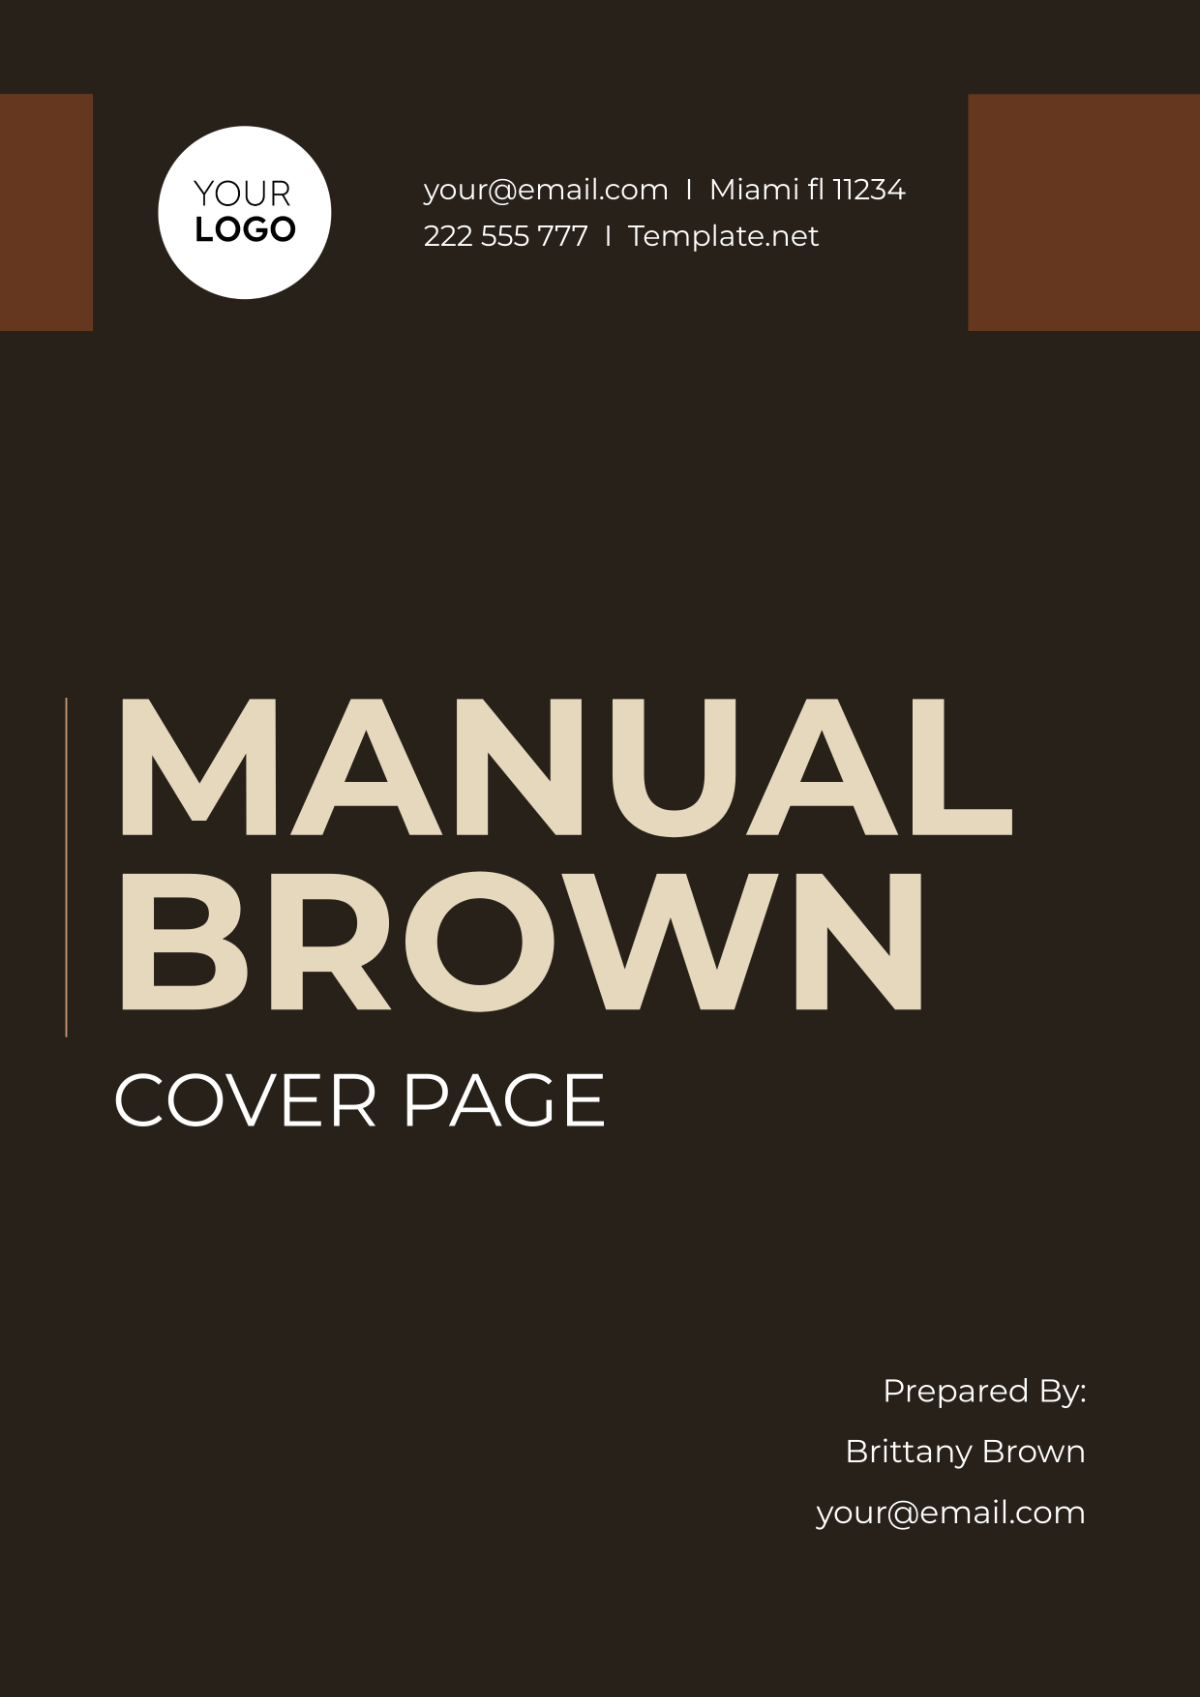 Manual Brown Cover Page Template